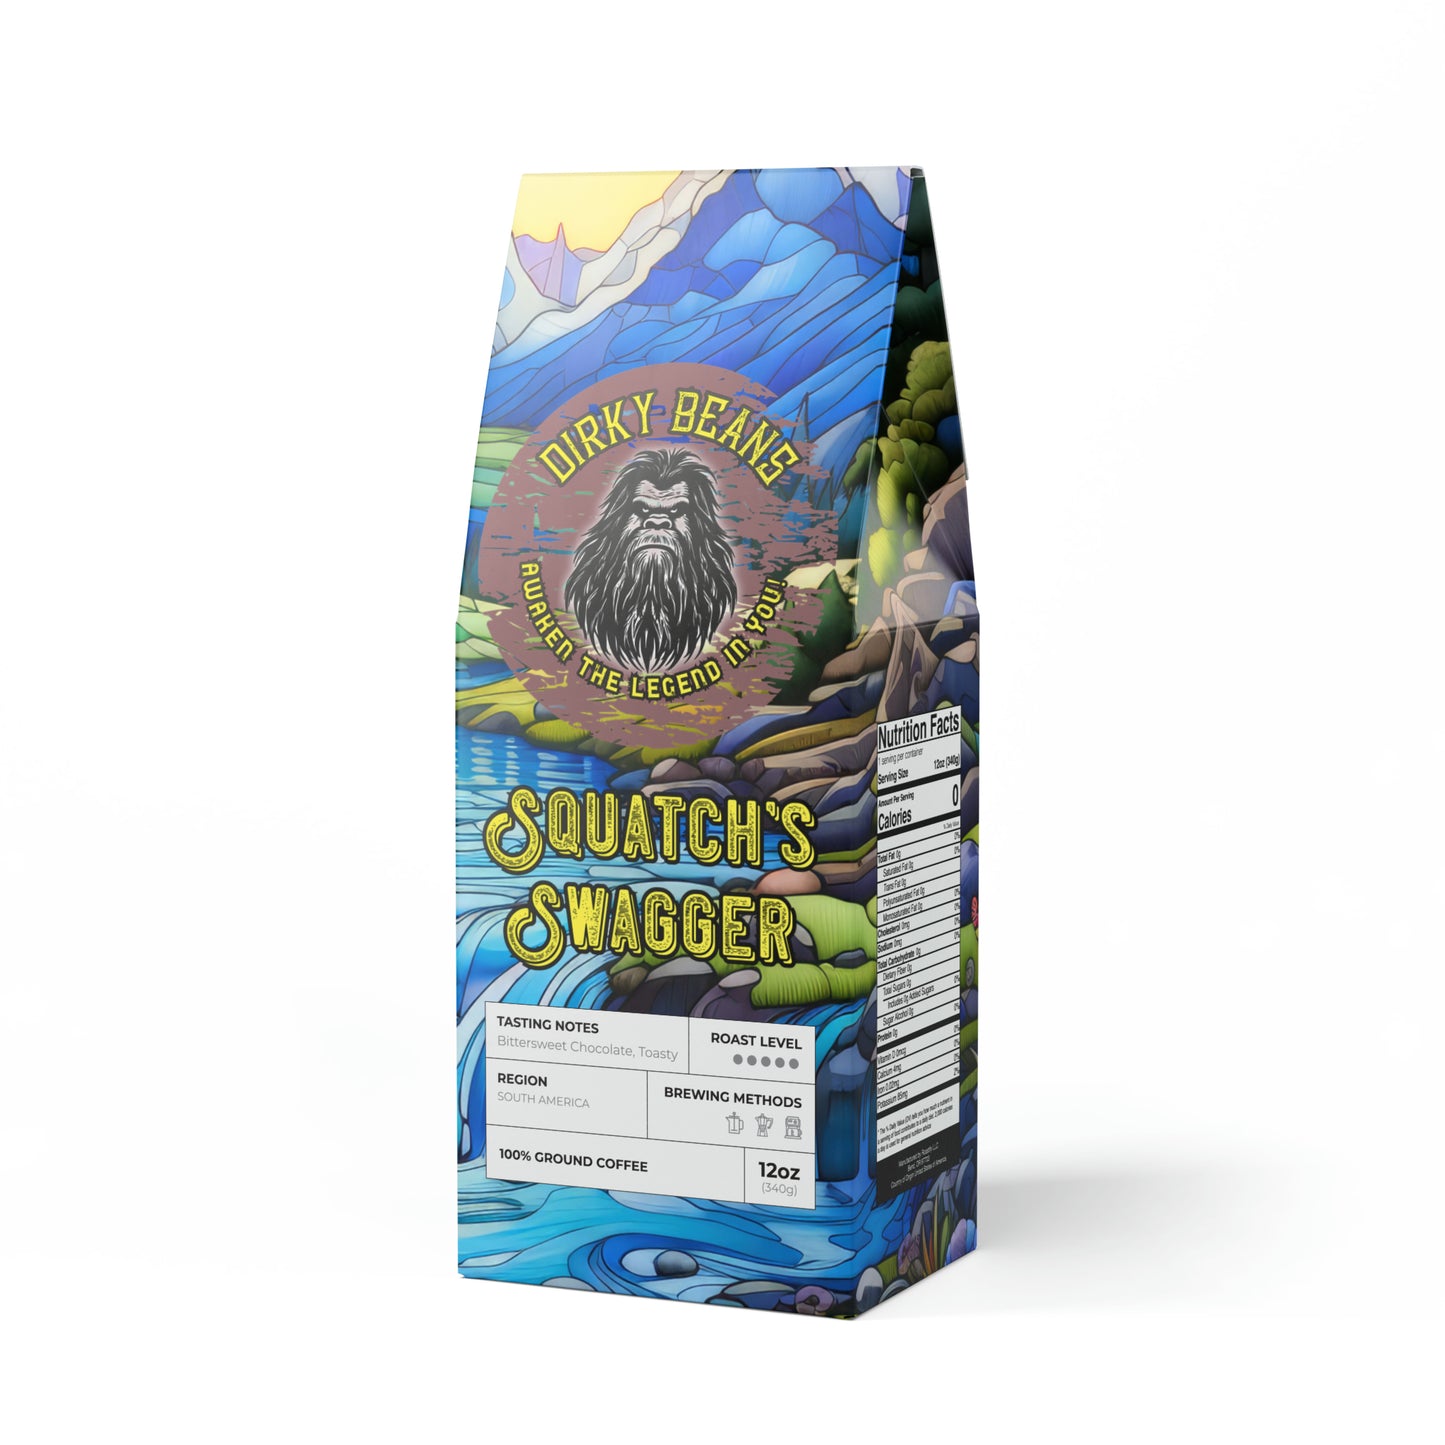 Squatch's Swagger: Get Bold with Dark French Roast Coffee